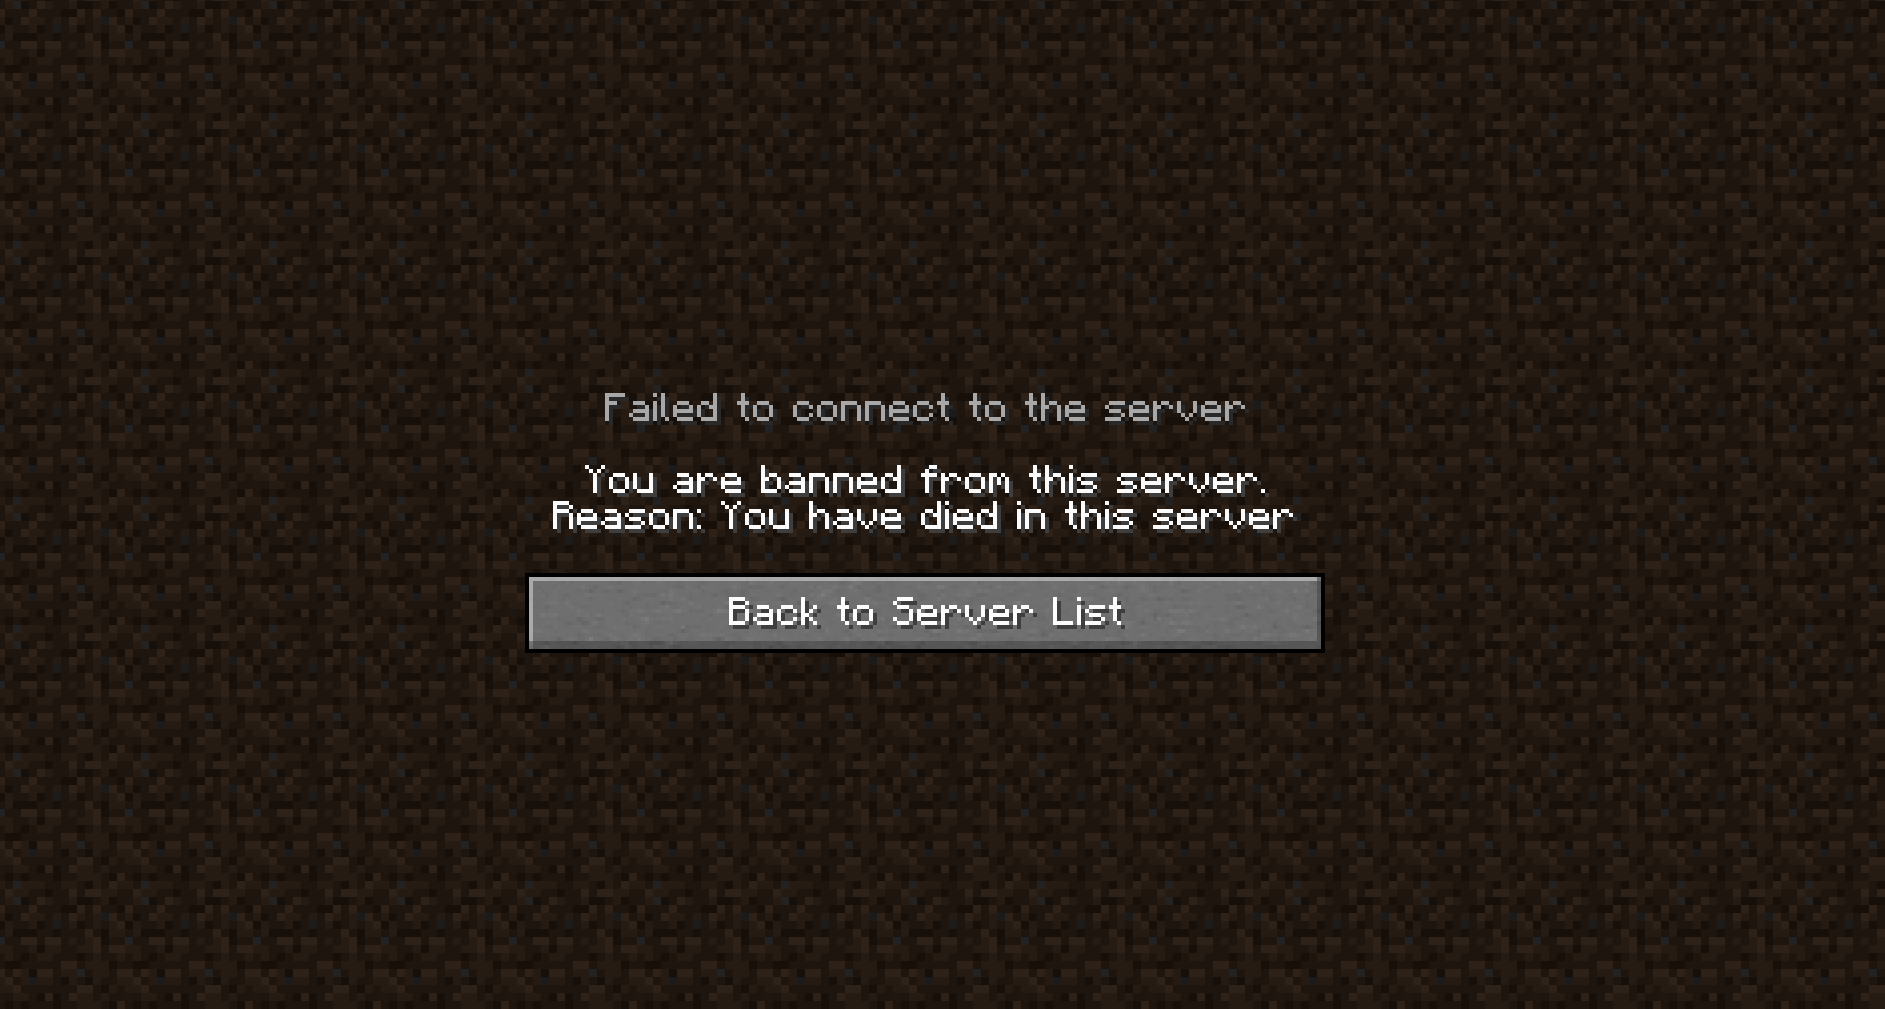 You are permanently banned from this server раст фото 15